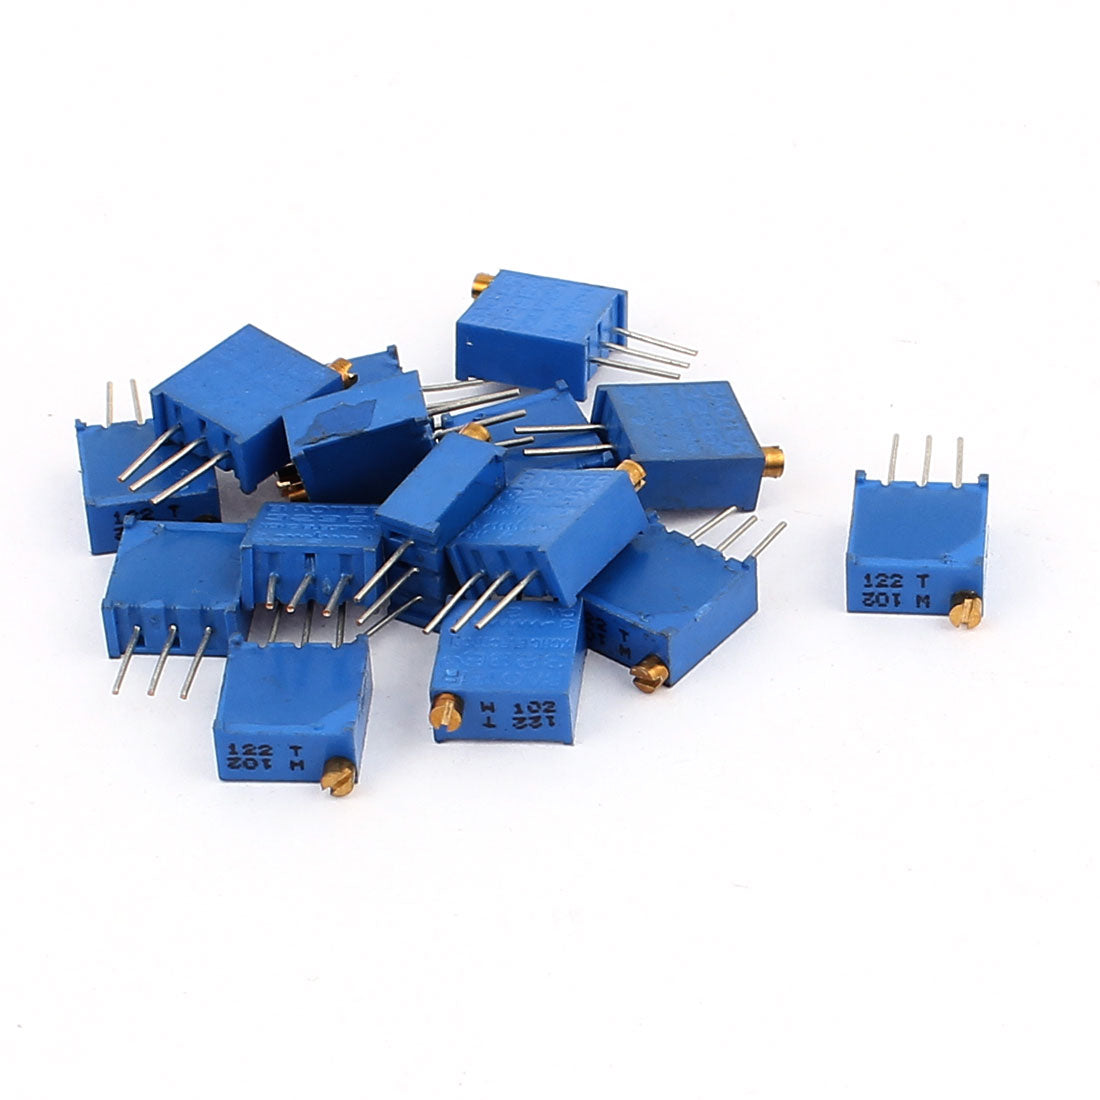 uxcell Uxcell 15 Pcs 3296W 1K ohm Multiturn Potentiometer Pot Variable Resistor